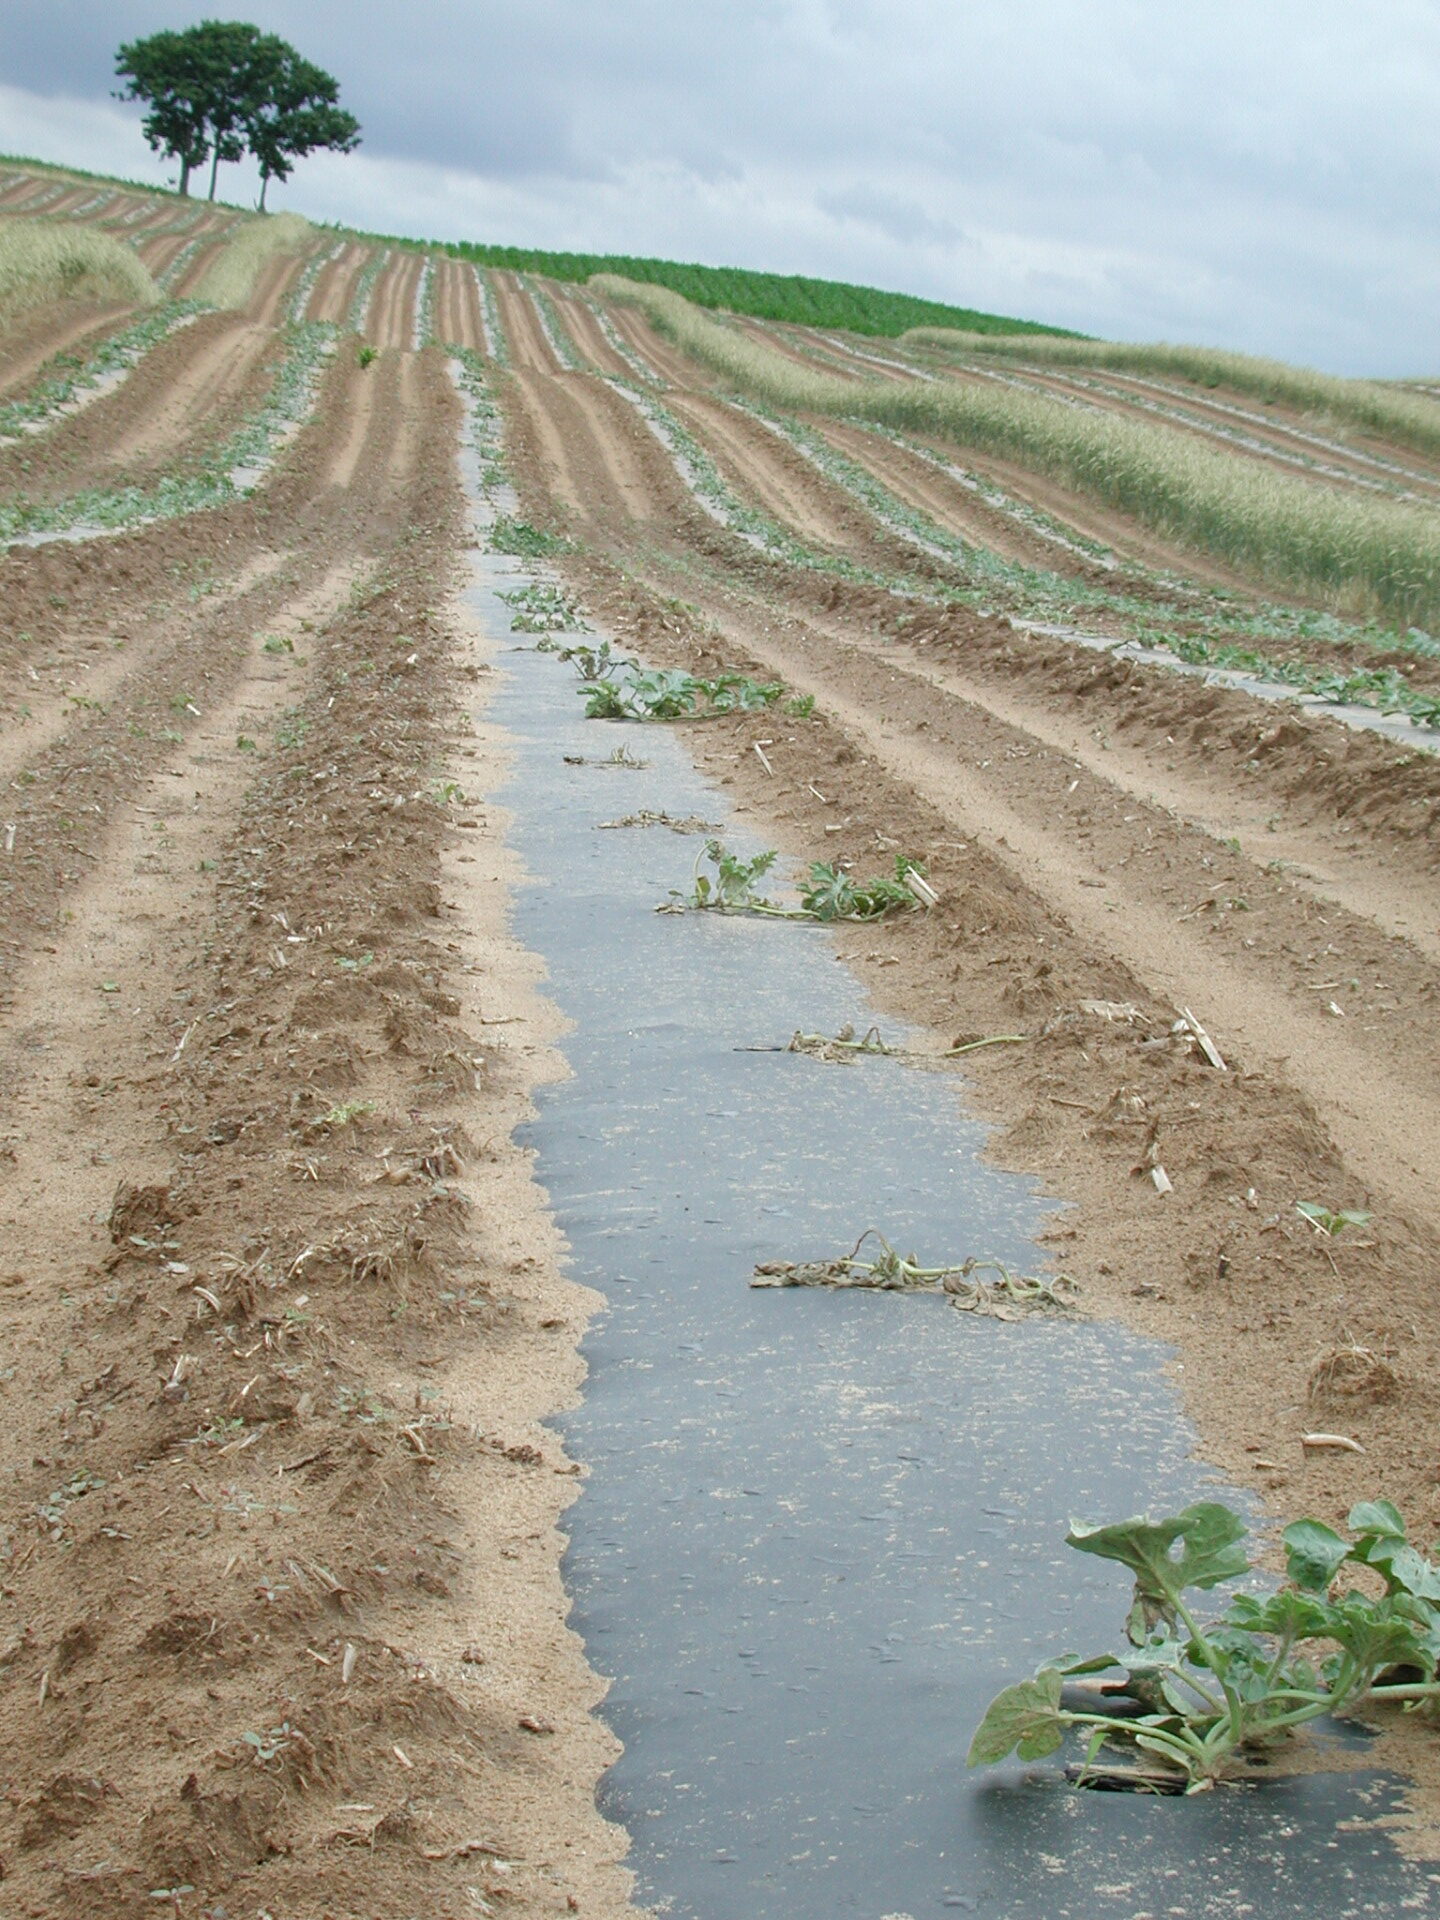 Figure 3. The distribution of Fusarium wilt of watermelon in the field is often clustered.